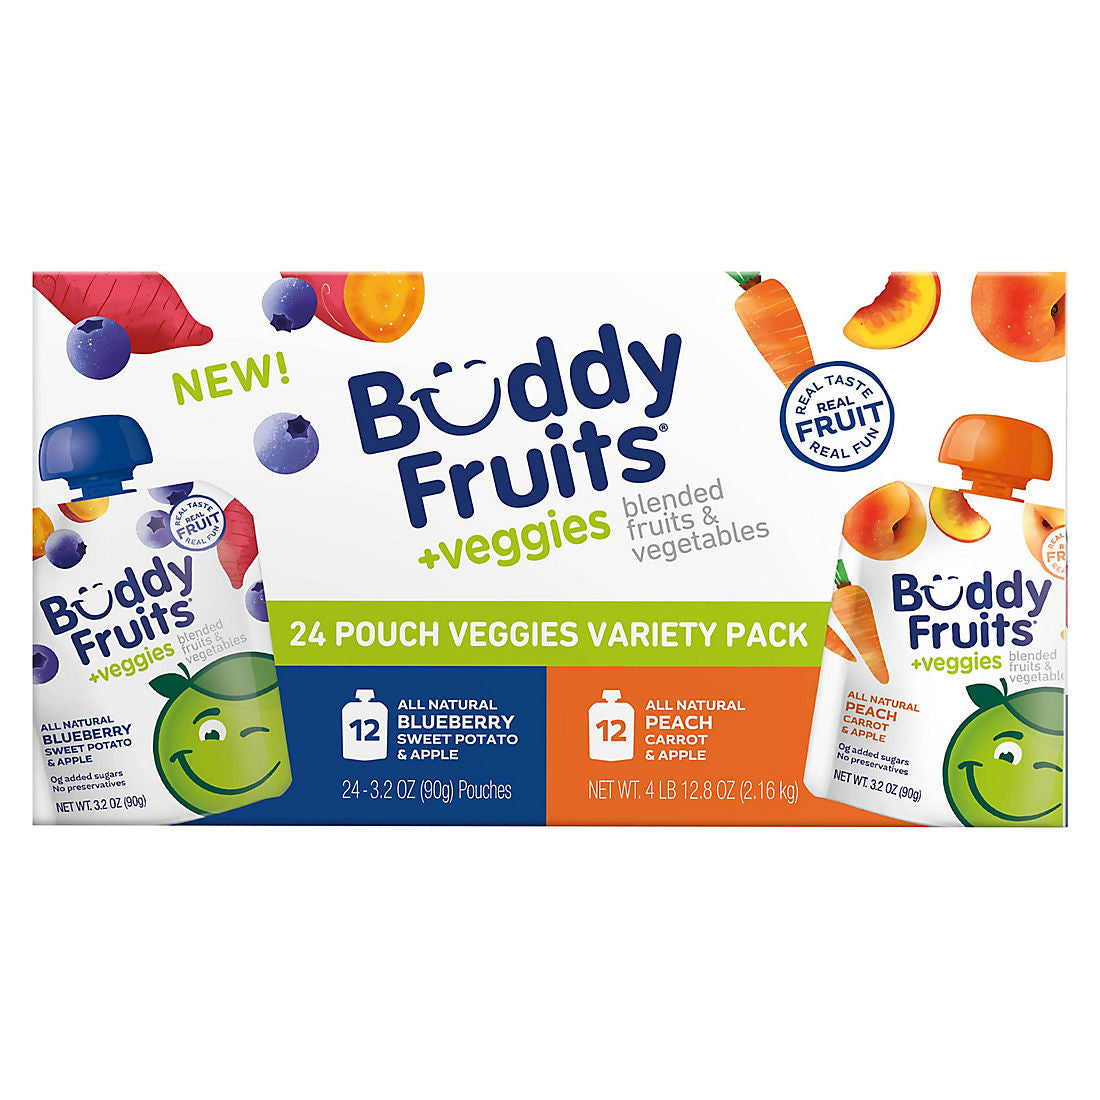 Buddy Fruits Blended Veggie and Fruit Pouches Variety Pack, 24 ct.